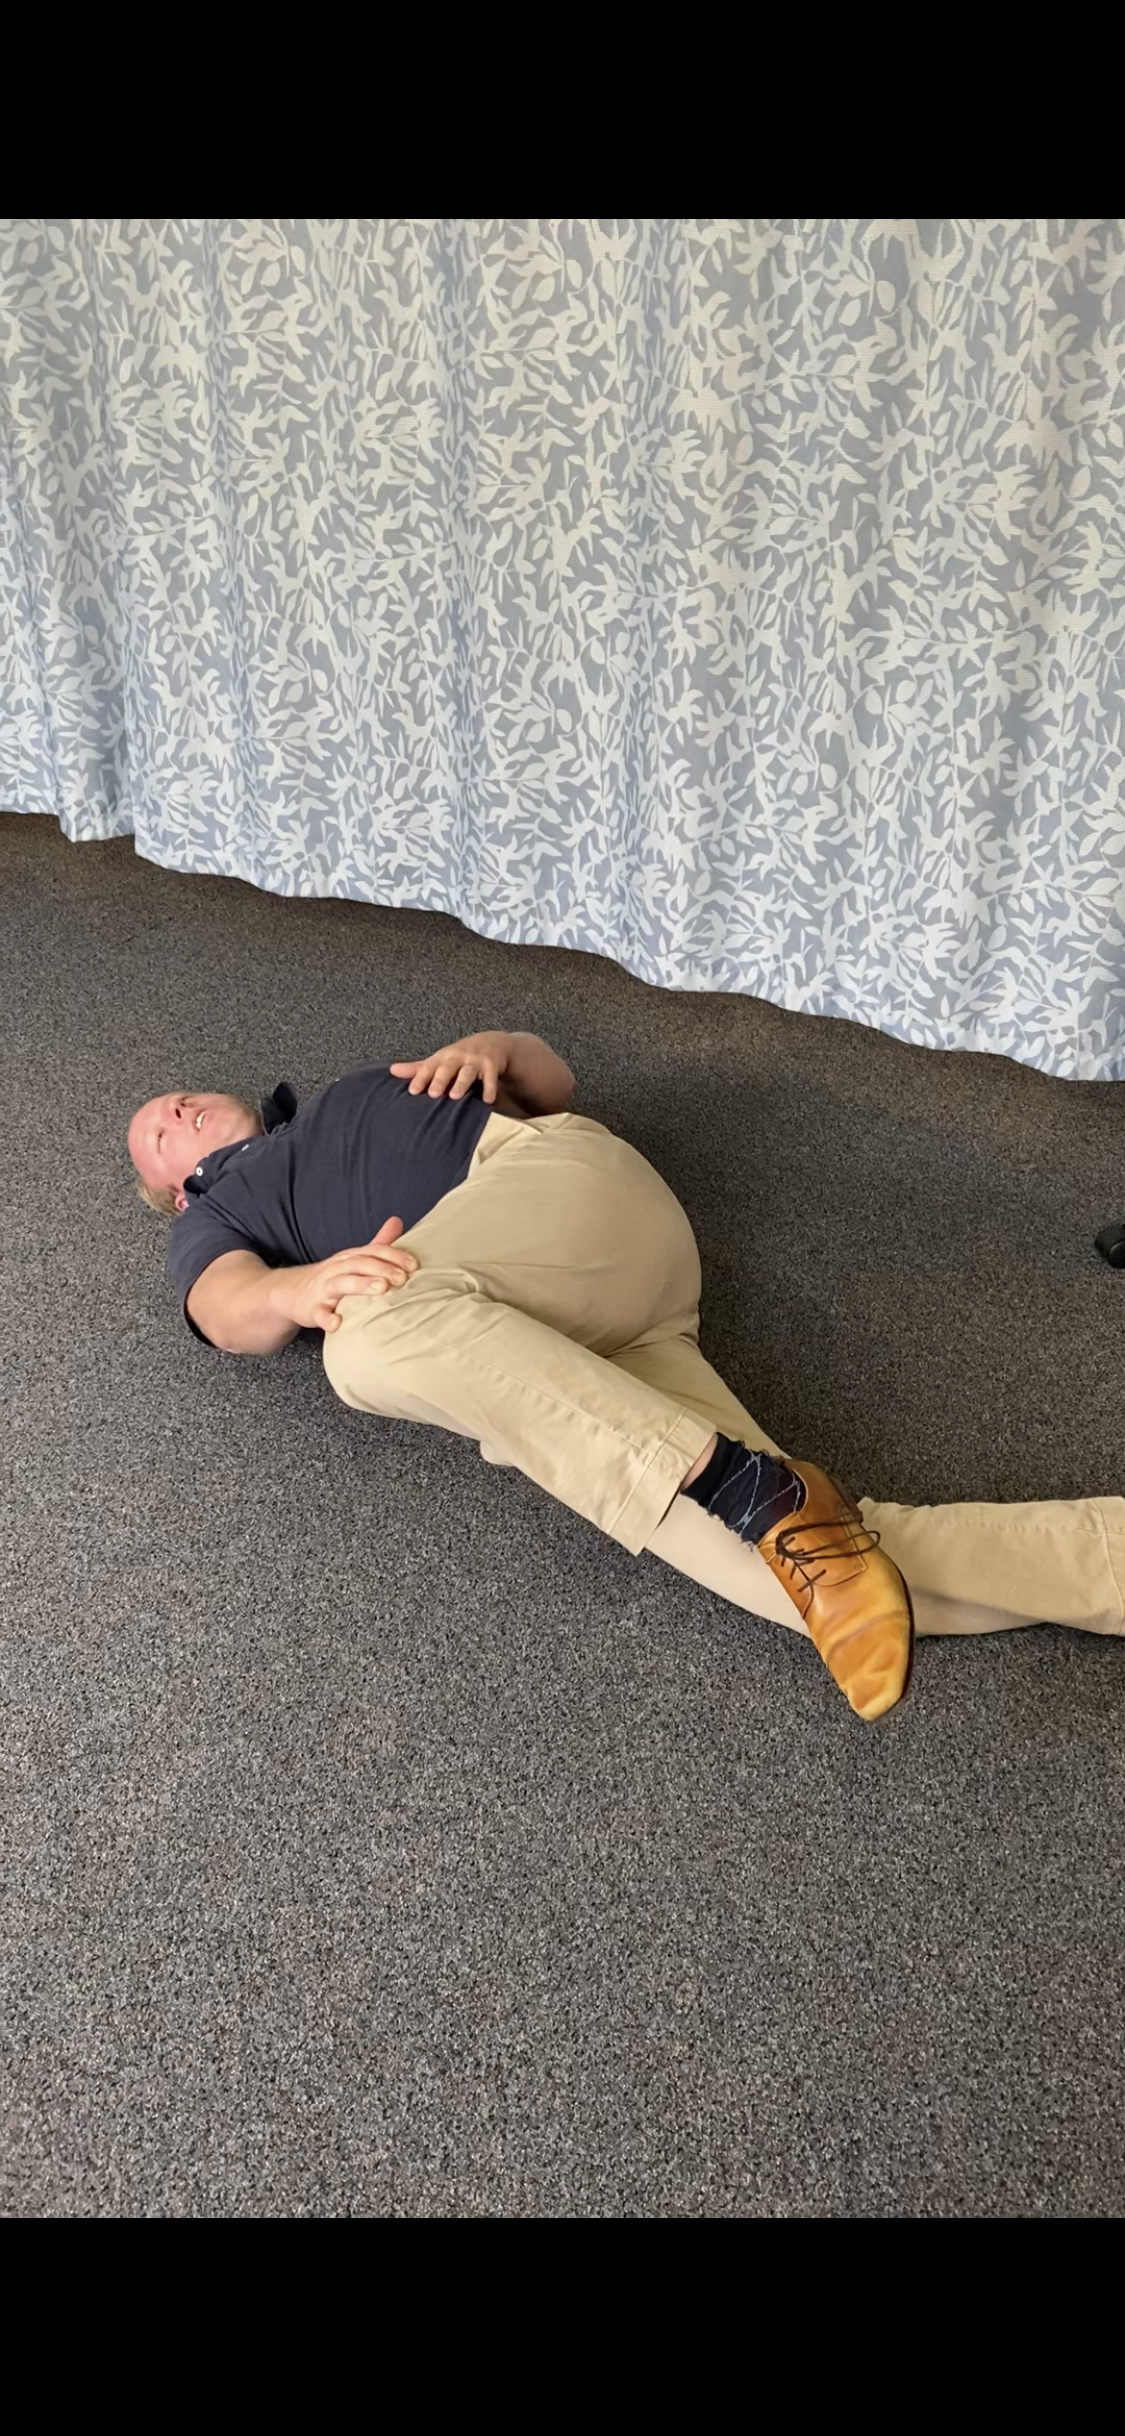 Central Coast Osteopath Dr Daniel Joiner Single leg roll over for low back pain